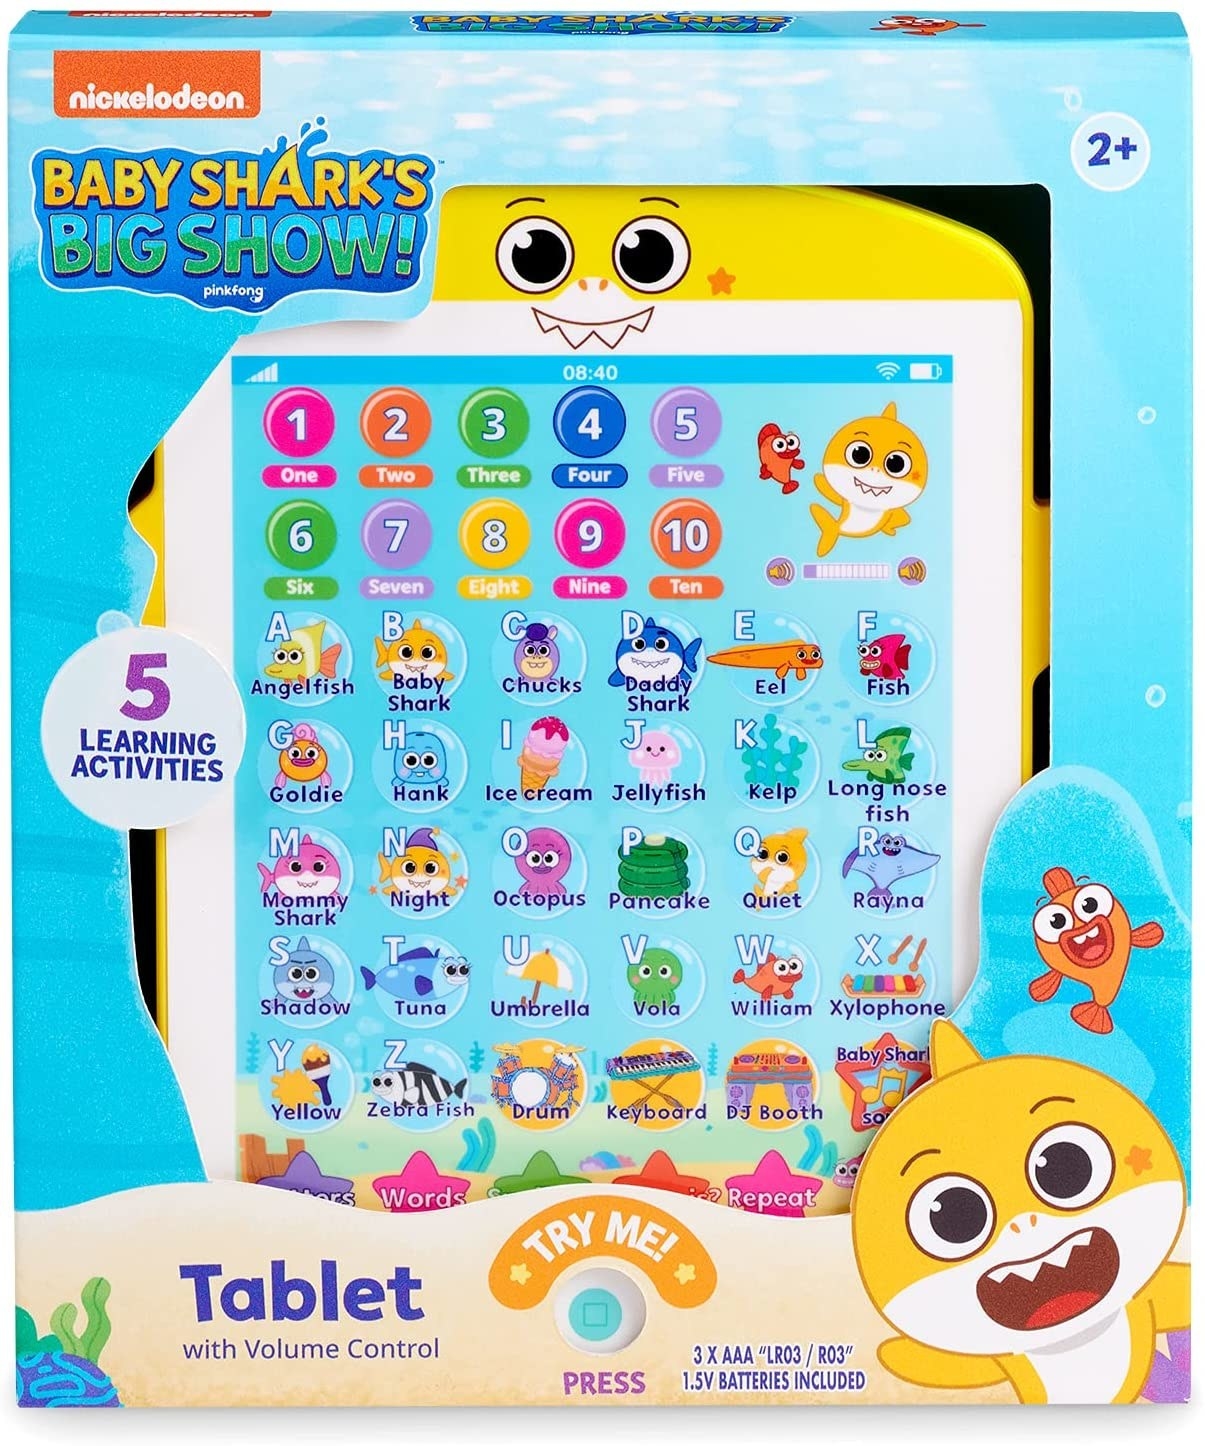 Product image of yellow shark-shaped tablet in box